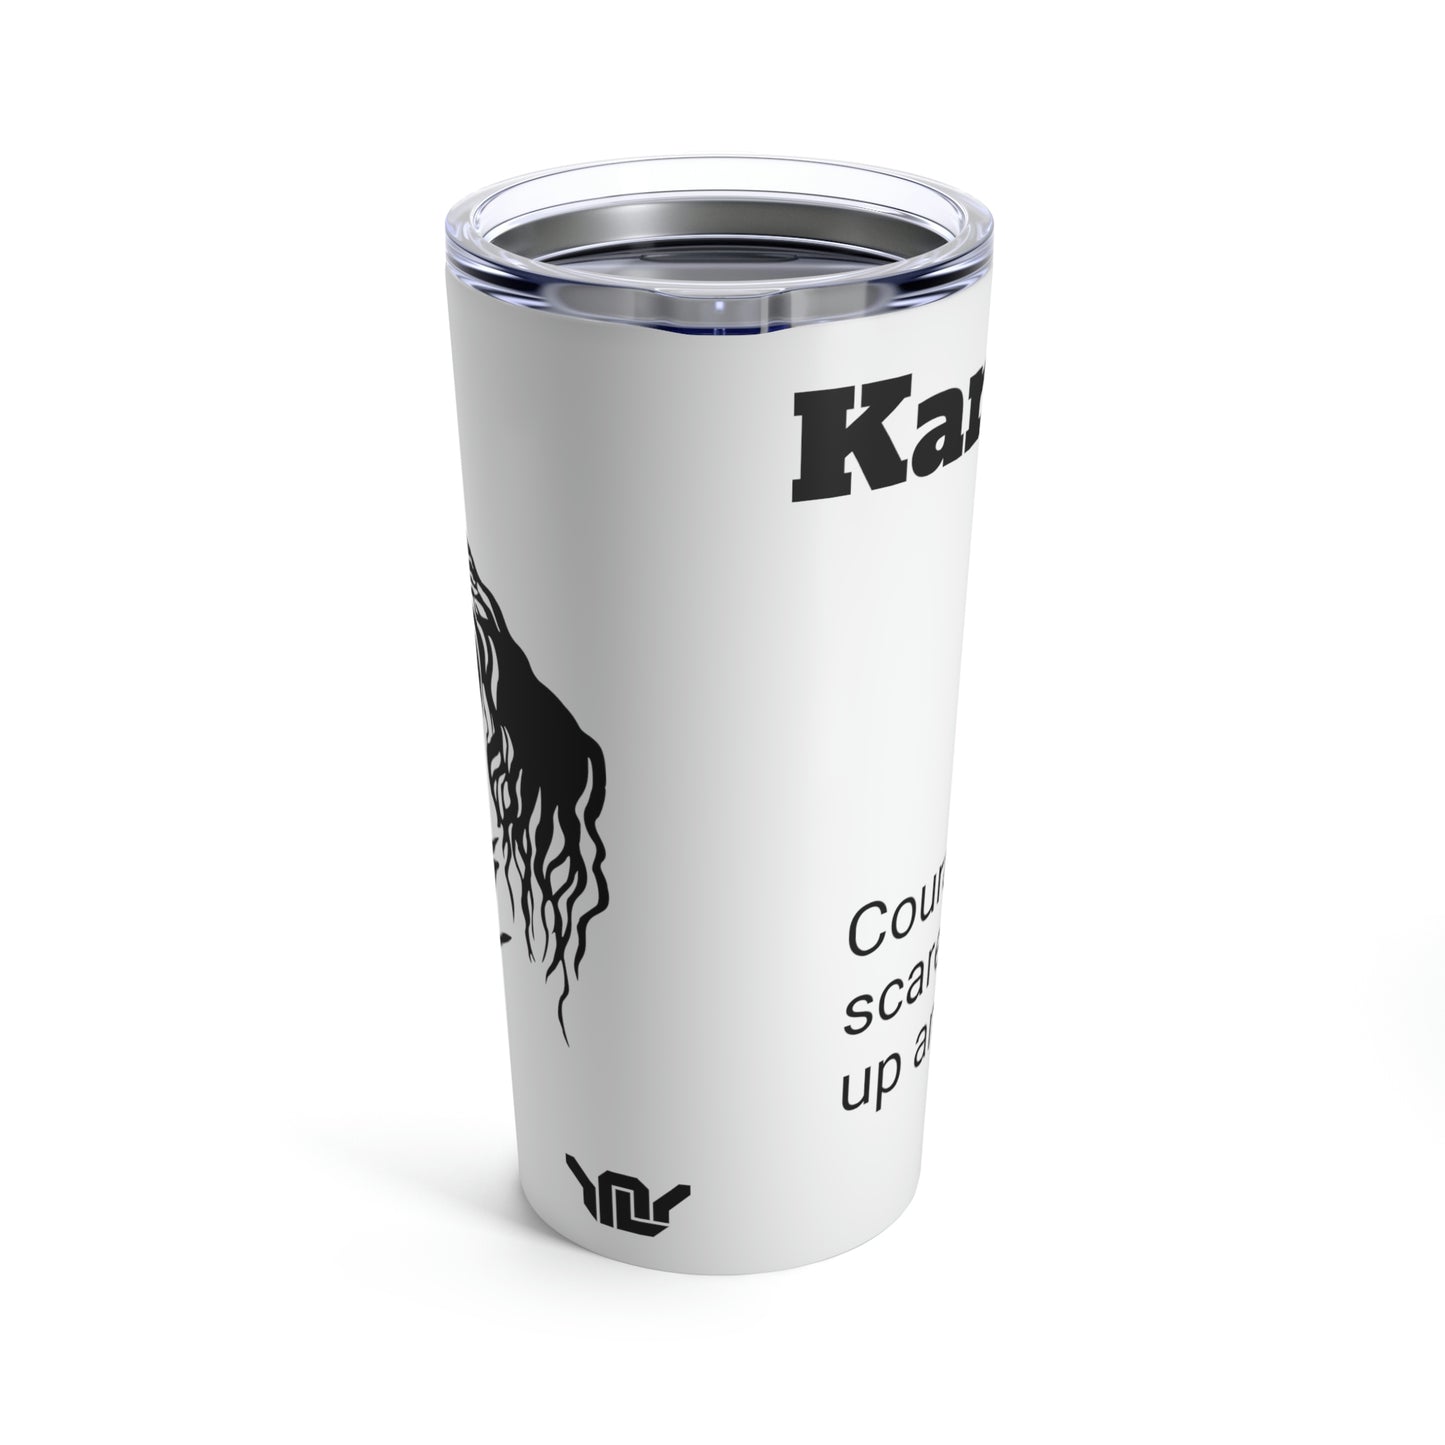 Buy an apple for Kardinaal, get a courage tumbler and video.